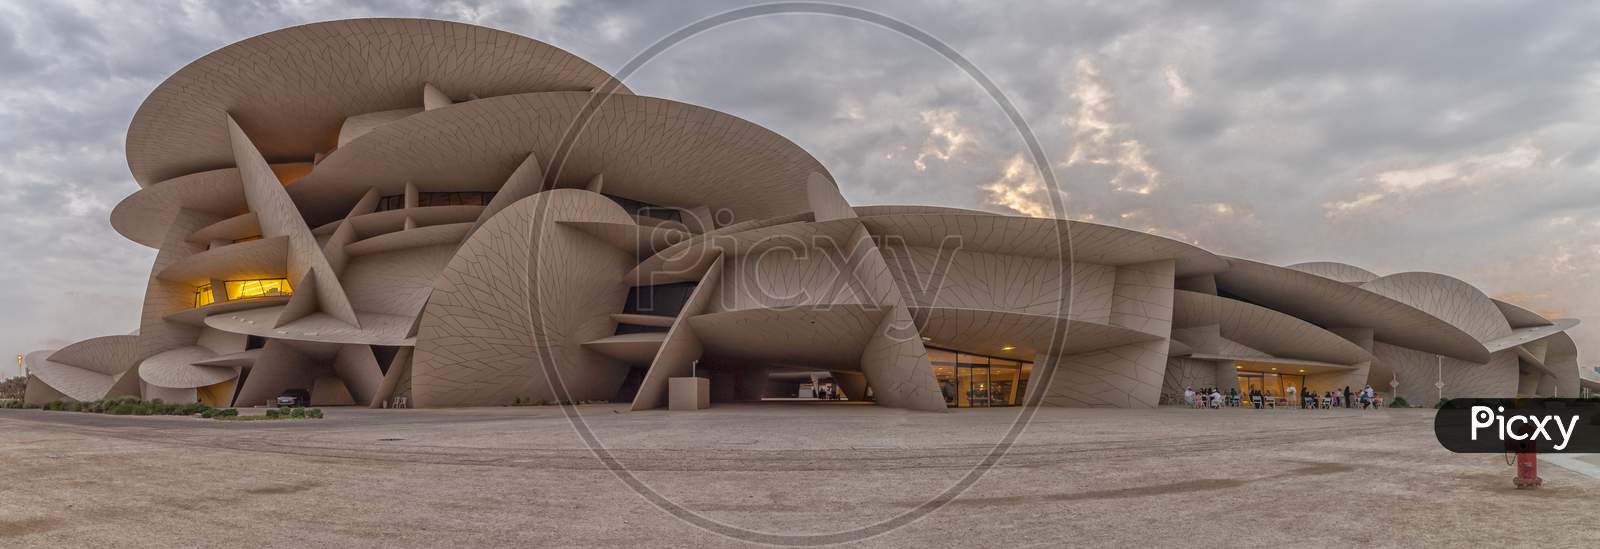 National Museum of Qatar (Desert rose) panoramic  view at sunset with clouds in the sky